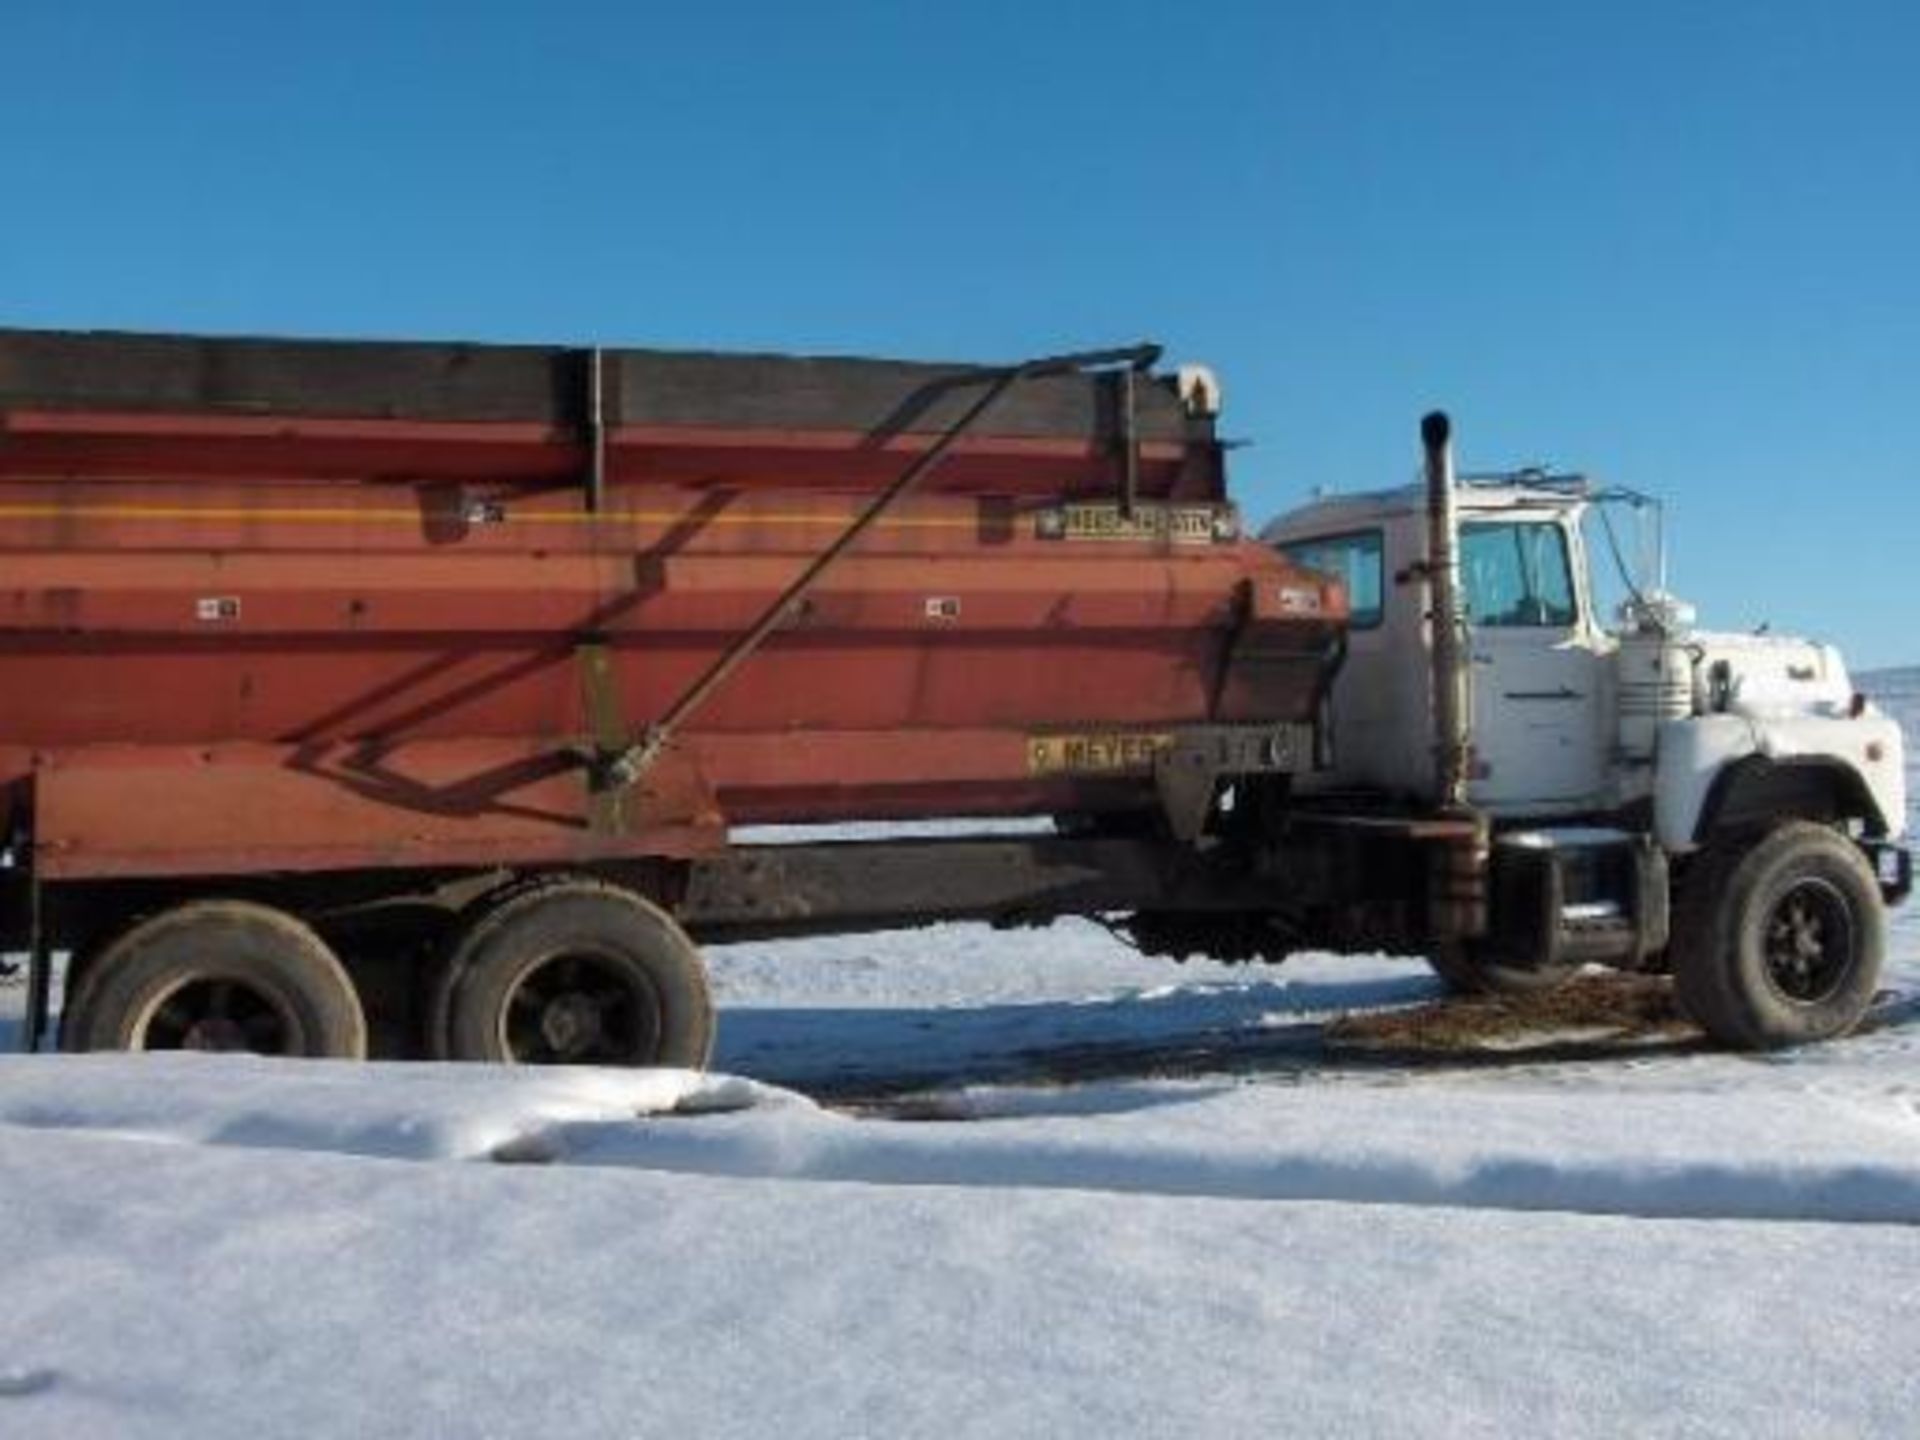 Mack DM 965 1989 model 300 with recent ($12,000+) engine overhaul and Lo hole trans, and # 5570 Myer - Image 8 of 14